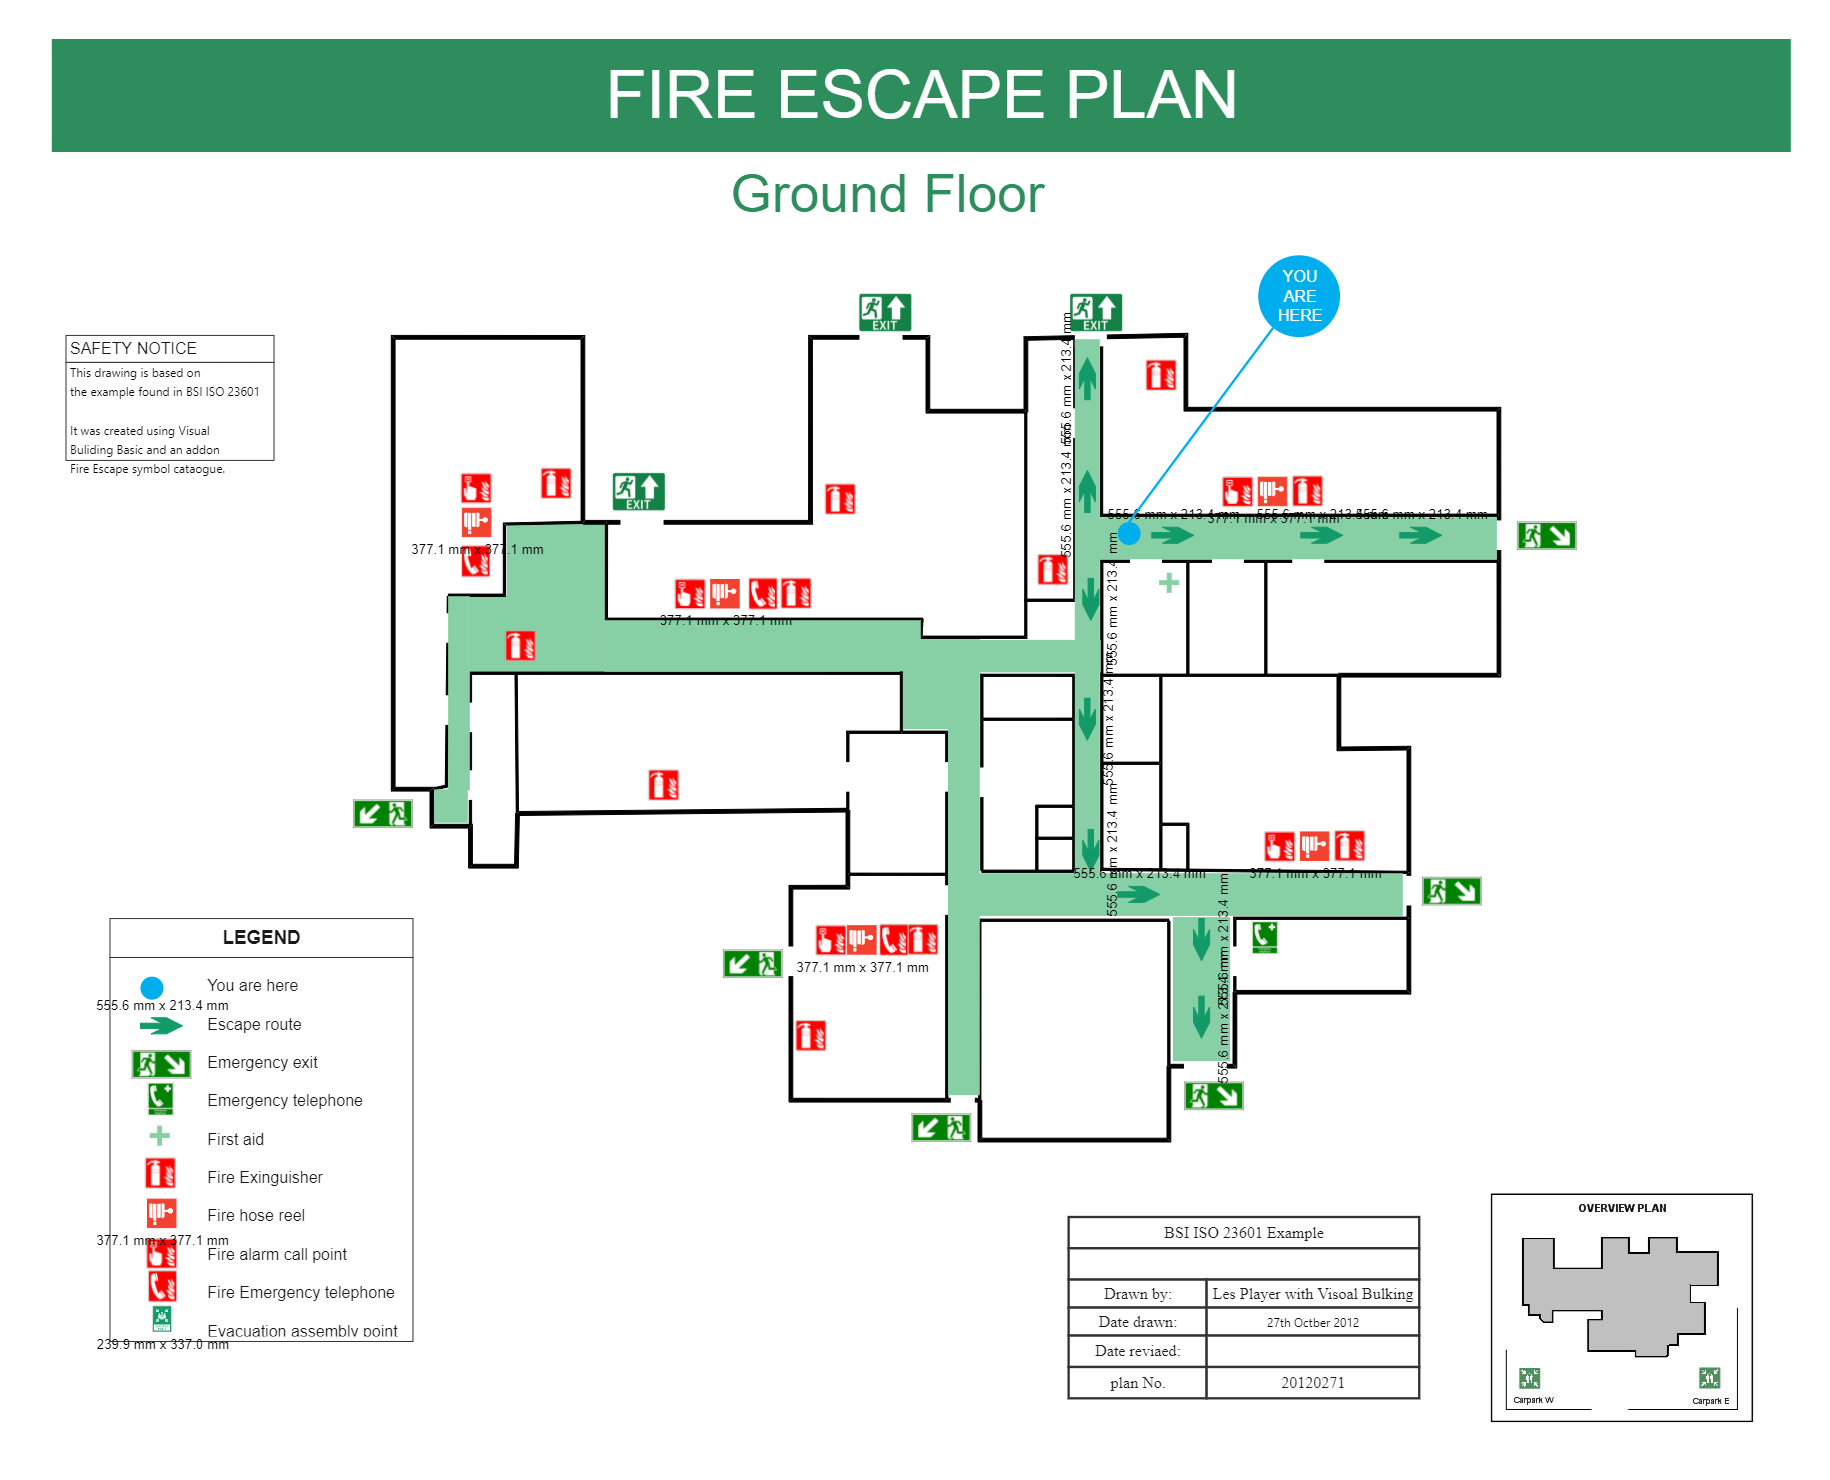 An office or residential fire escape plan will not only prepare your residents or employees for fires but rather for any emergency, whether that can be a natural disaster or any personal attack. Proper emergency evacuation planning will use multiple exits